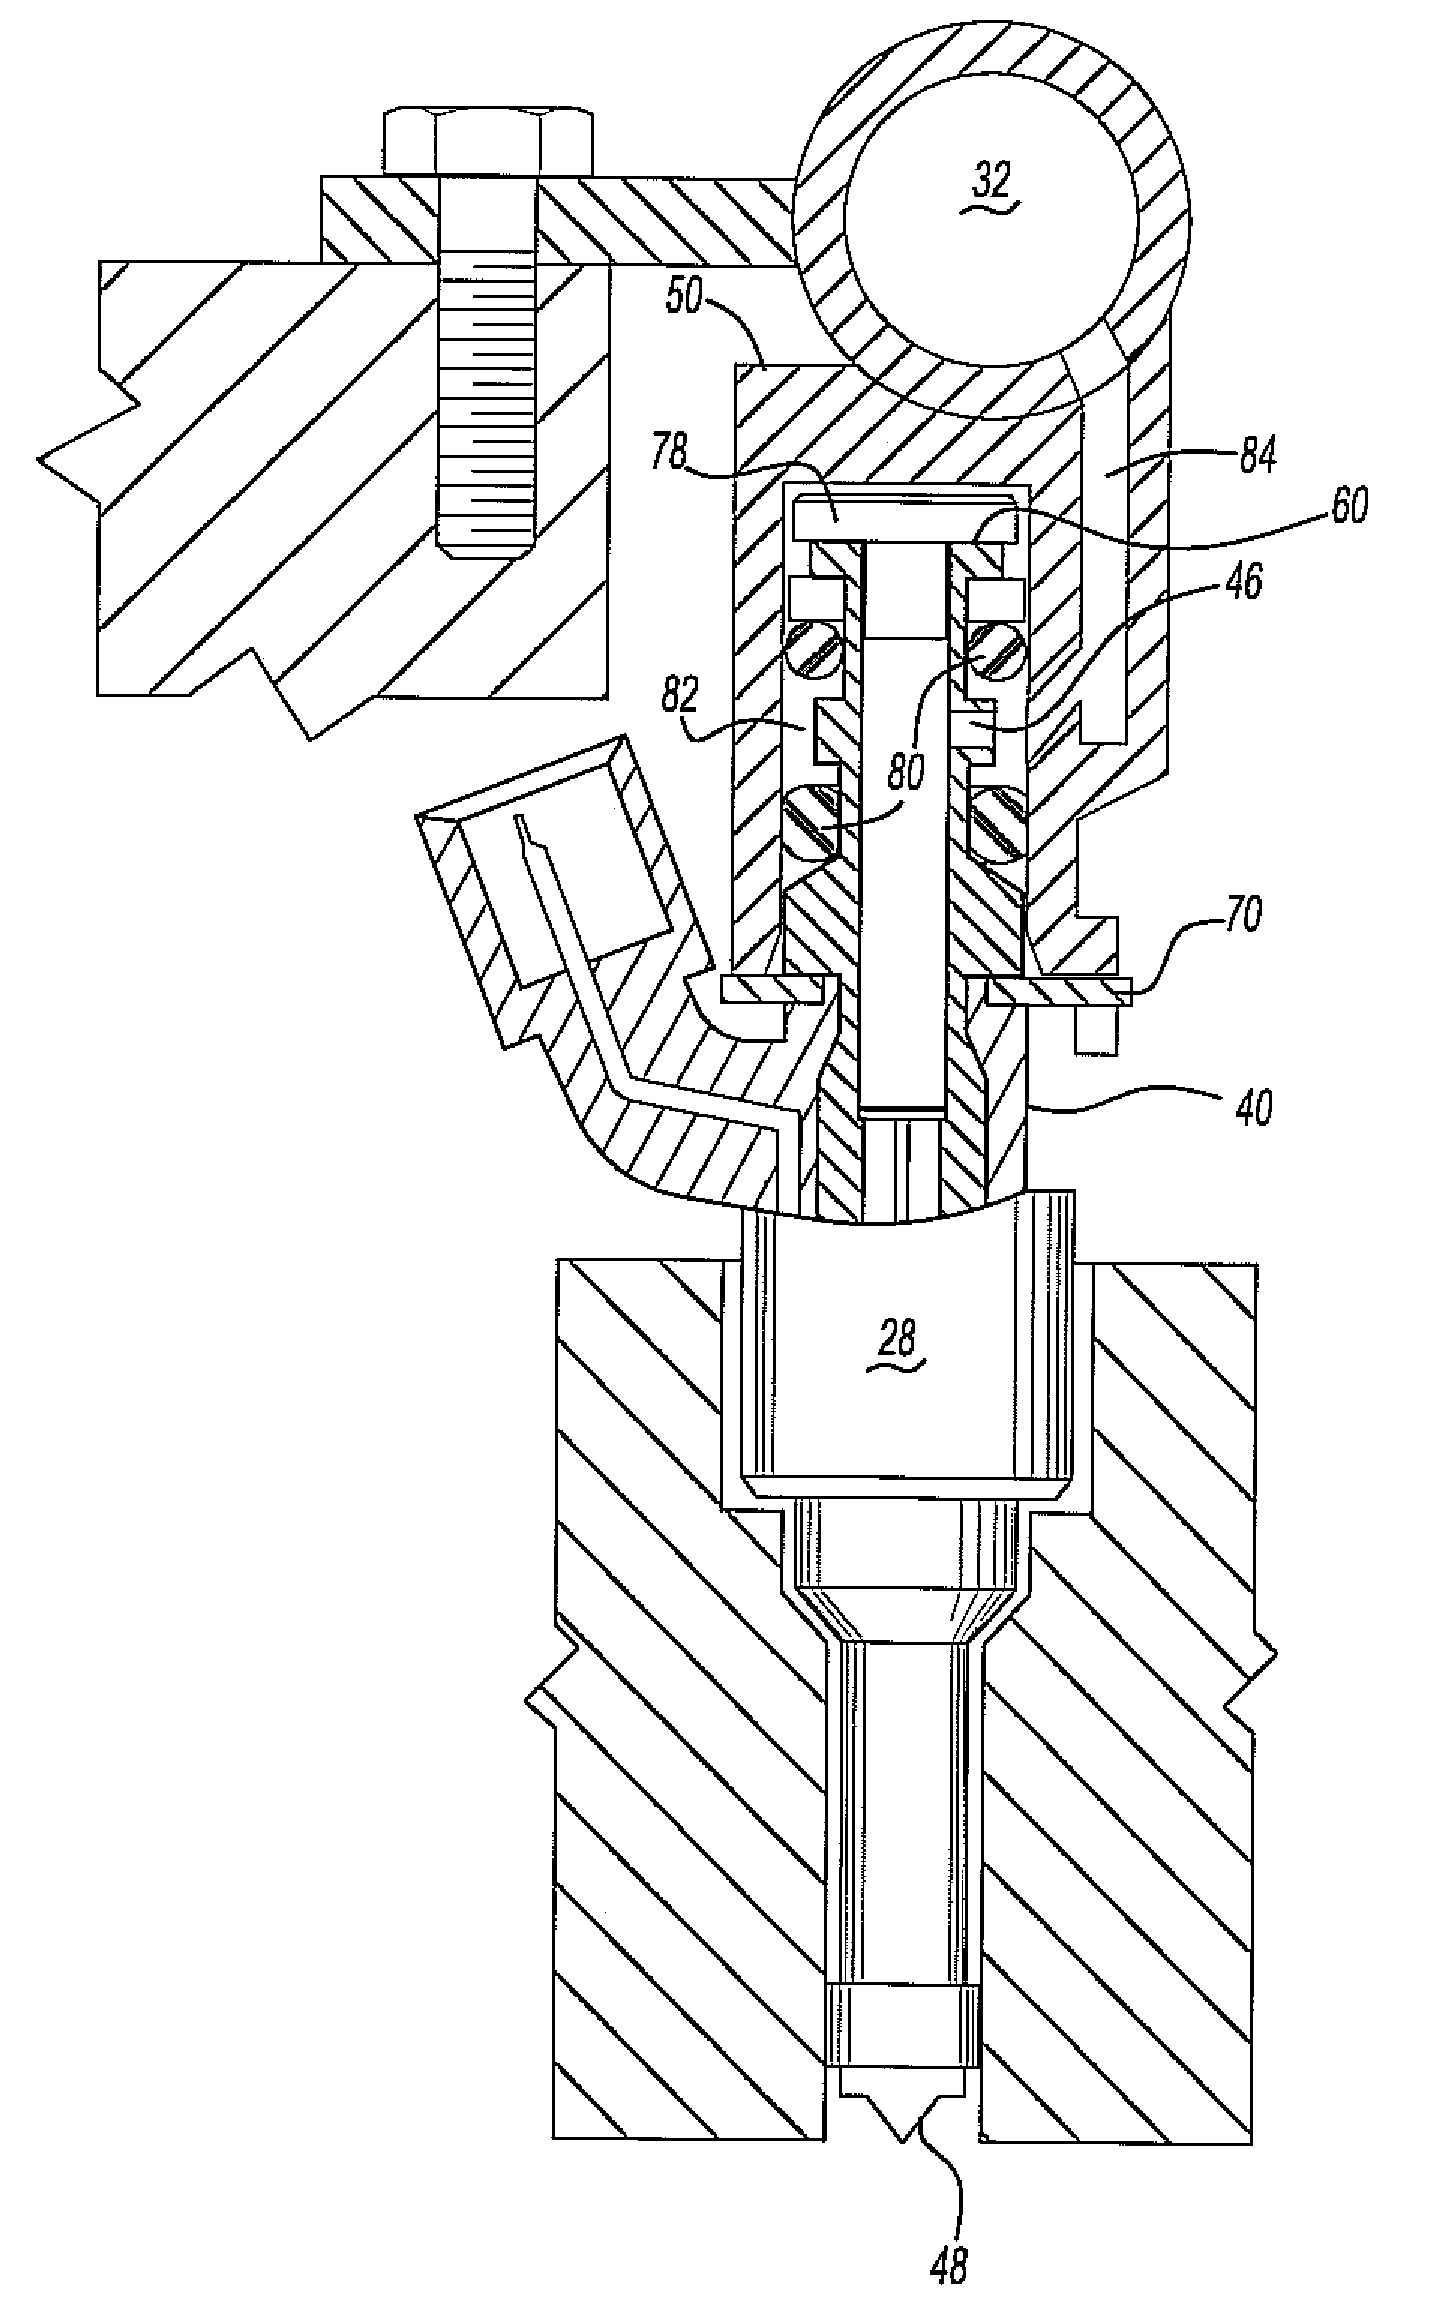 Method and apparatus for attenuating fuel pump noise in a direct injection internal combustion chamber